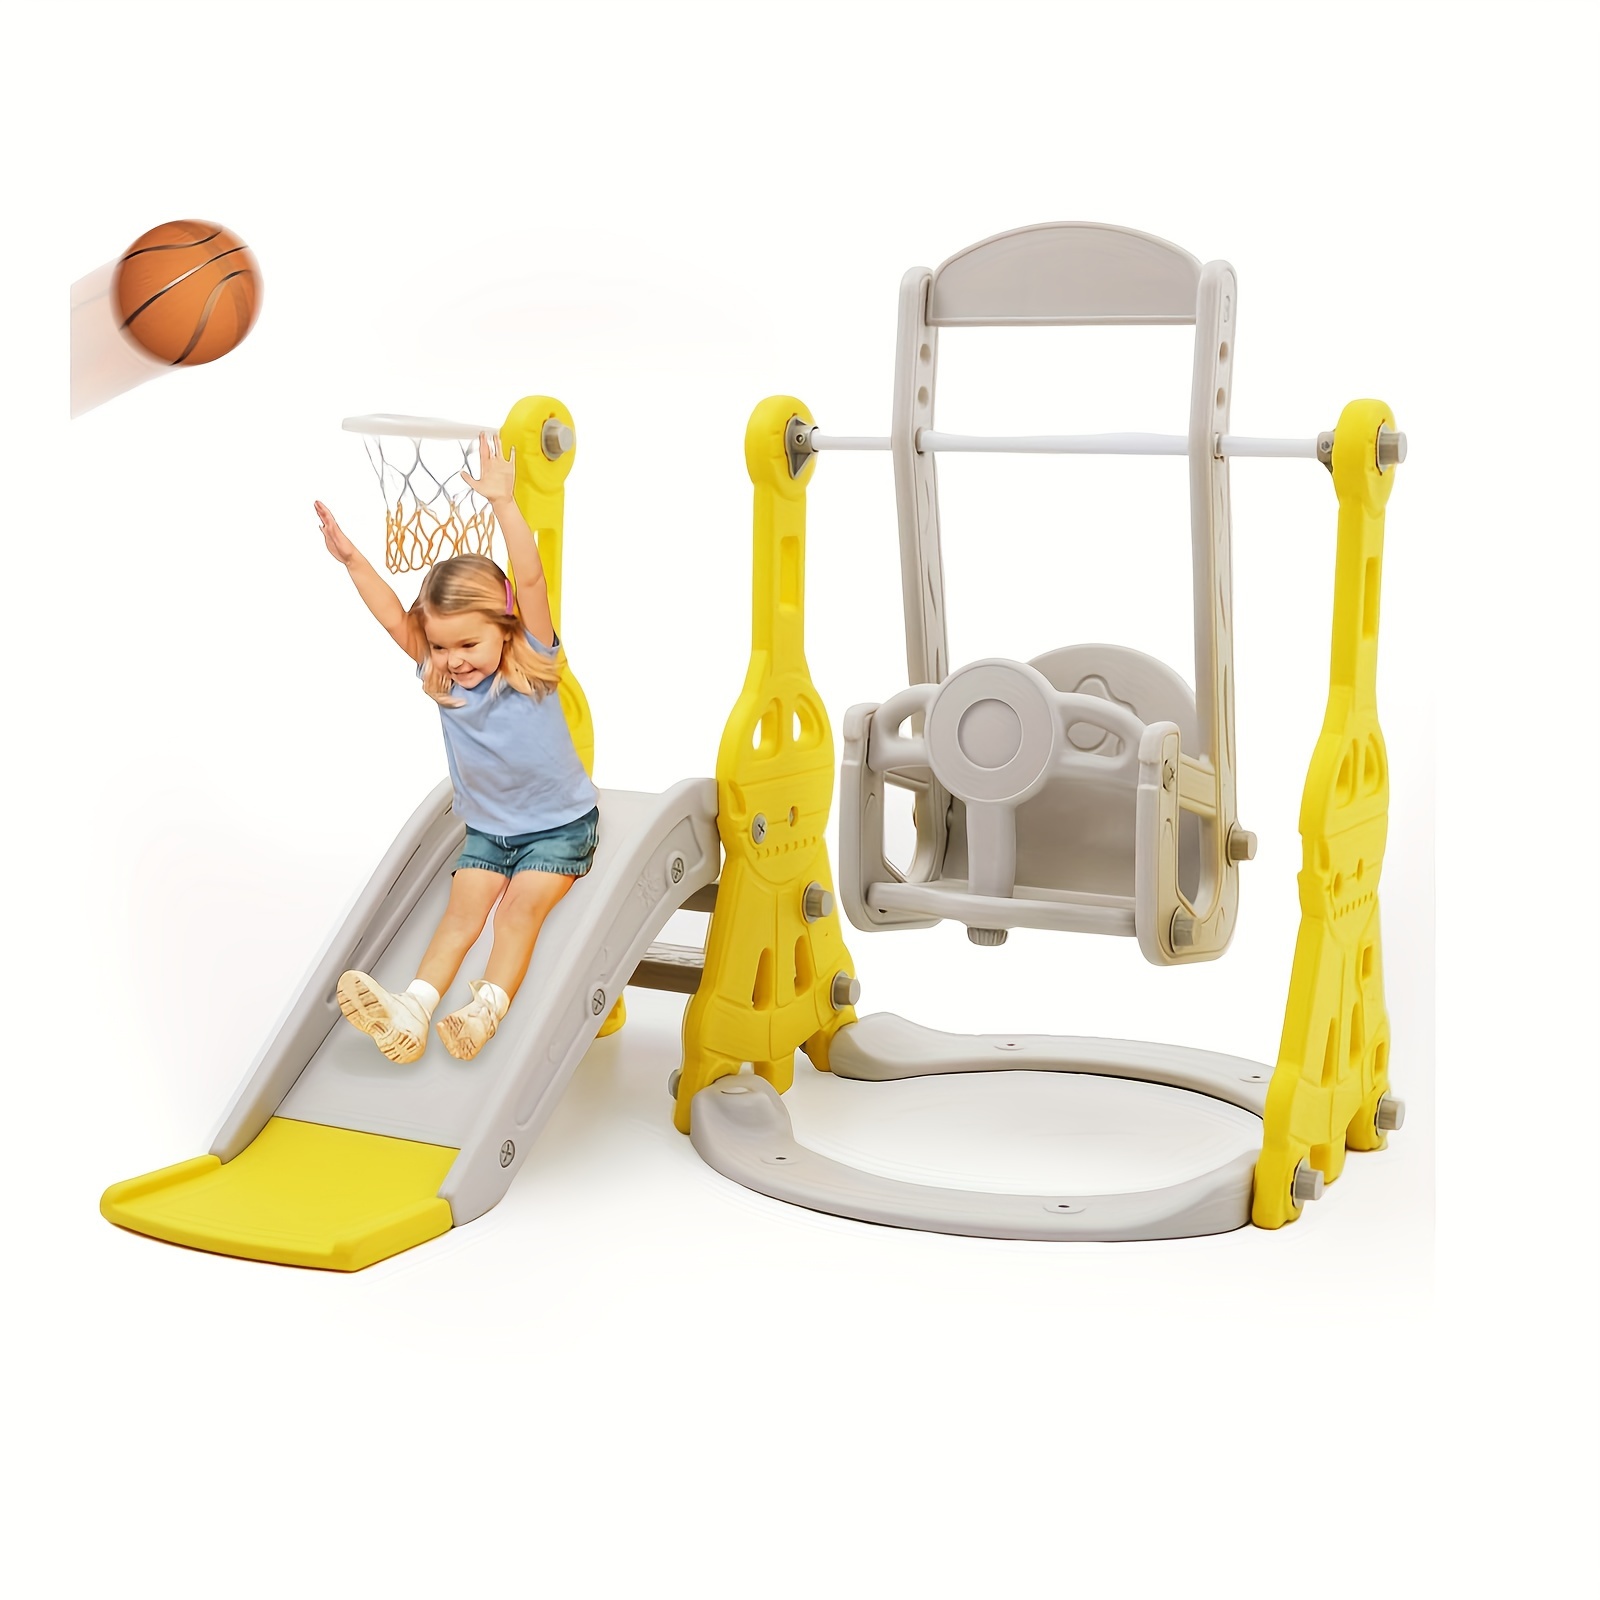 

Slide And Swing Set 4 In 1 Slide Climber Playse With Swing Slide Climber And Basketball Slide And Swing Set Indoor Outdoor Backyard Playground Toy (yellow)